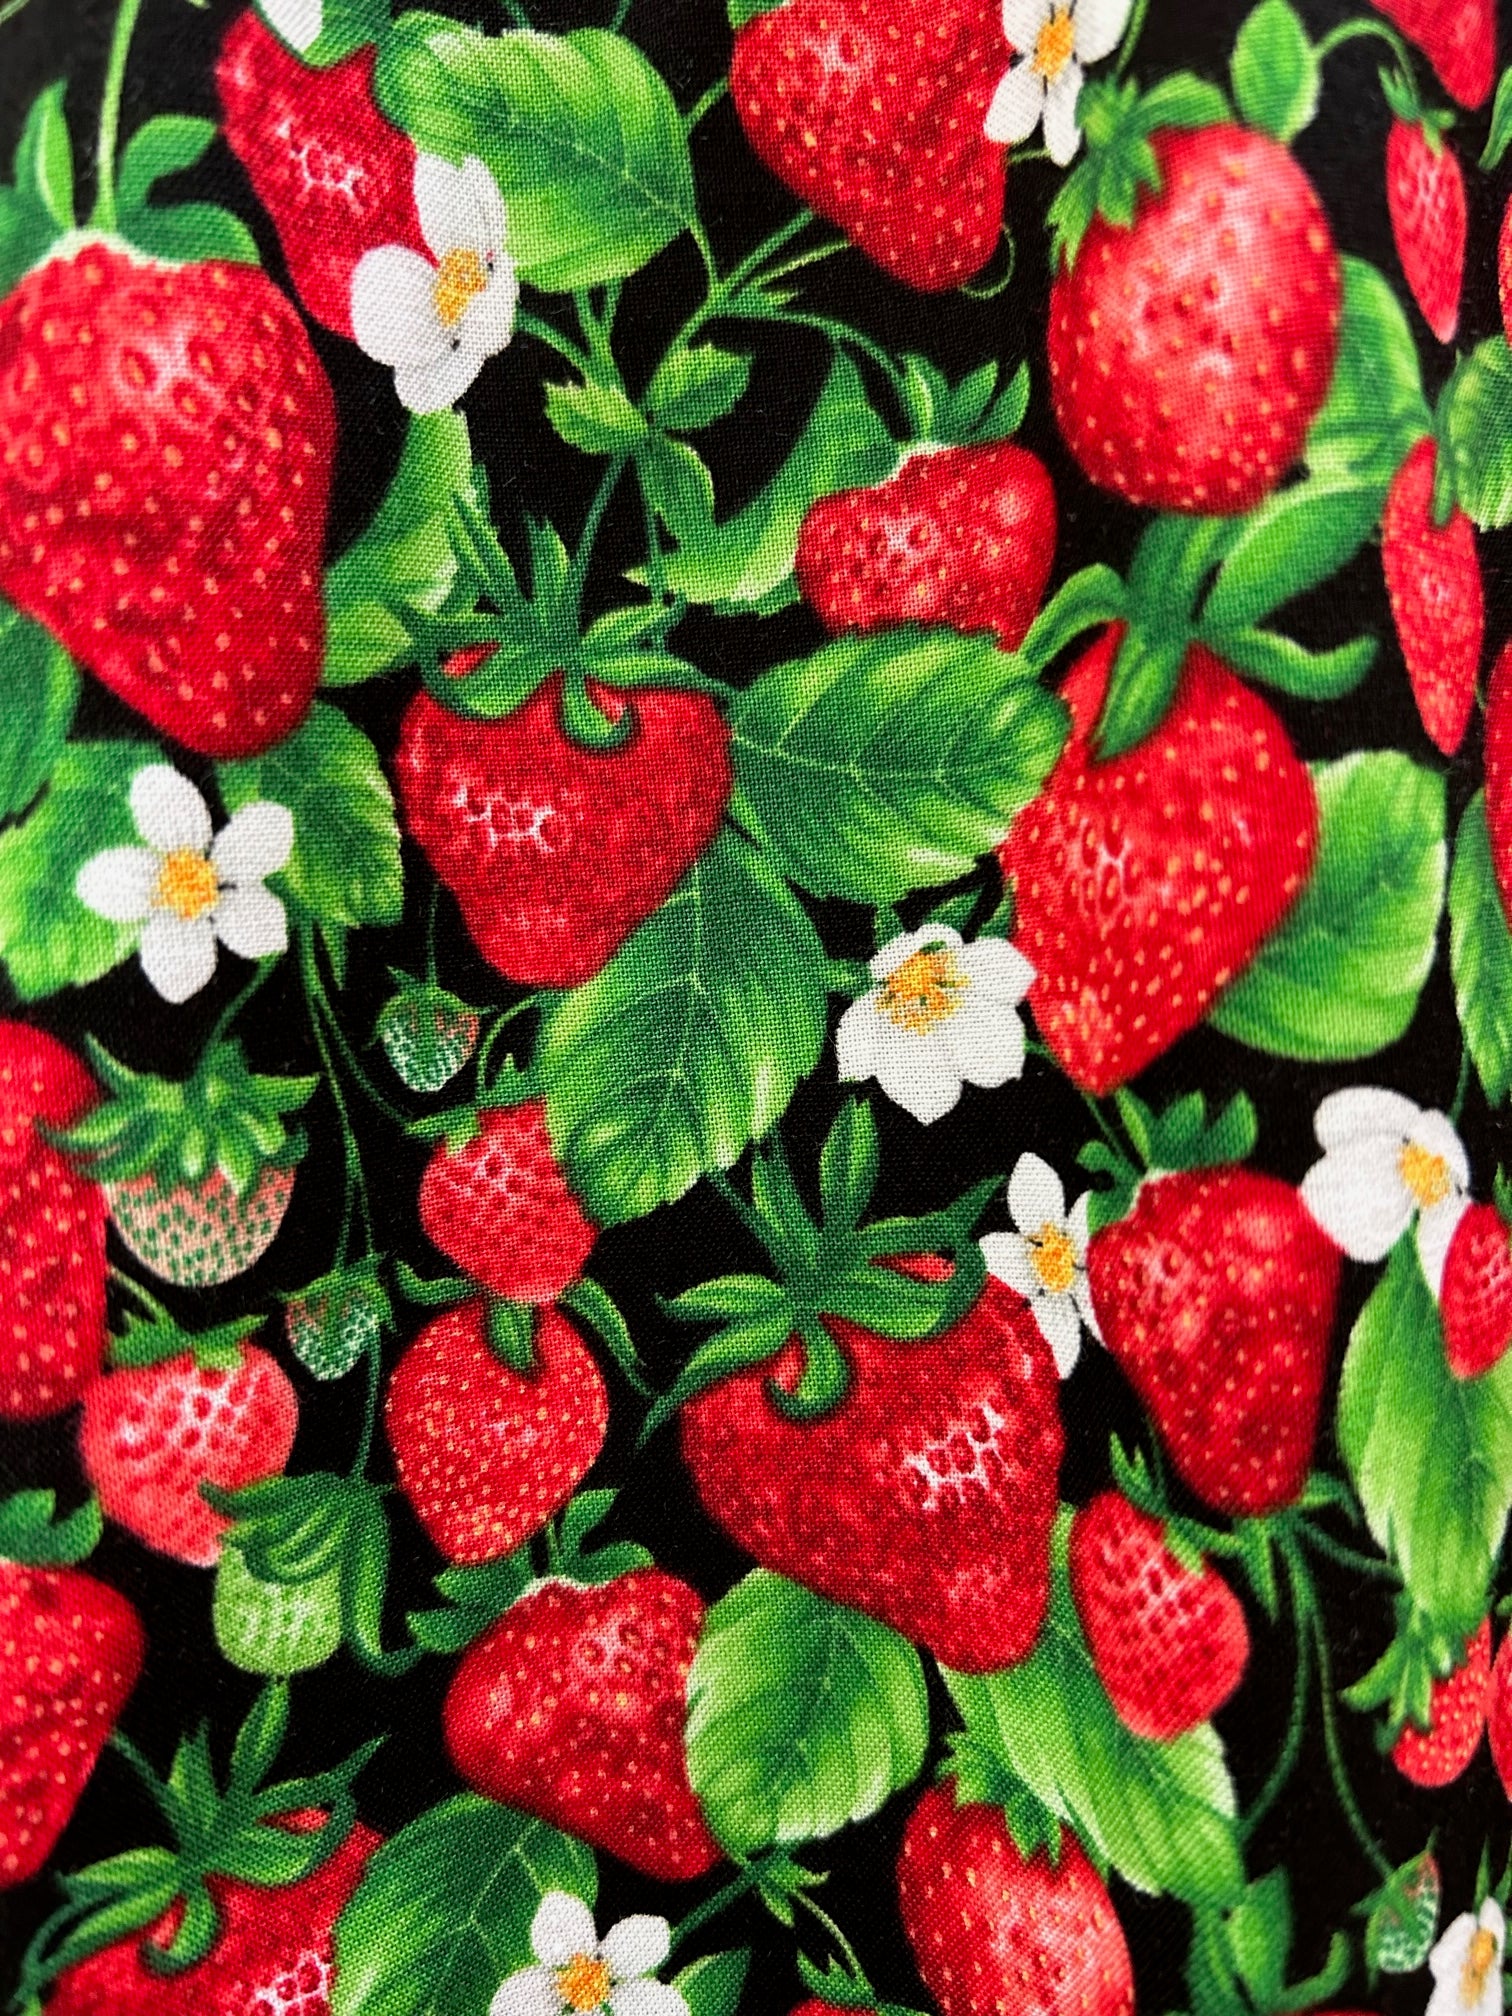 Strawberries, Vintage Inspired Fabric